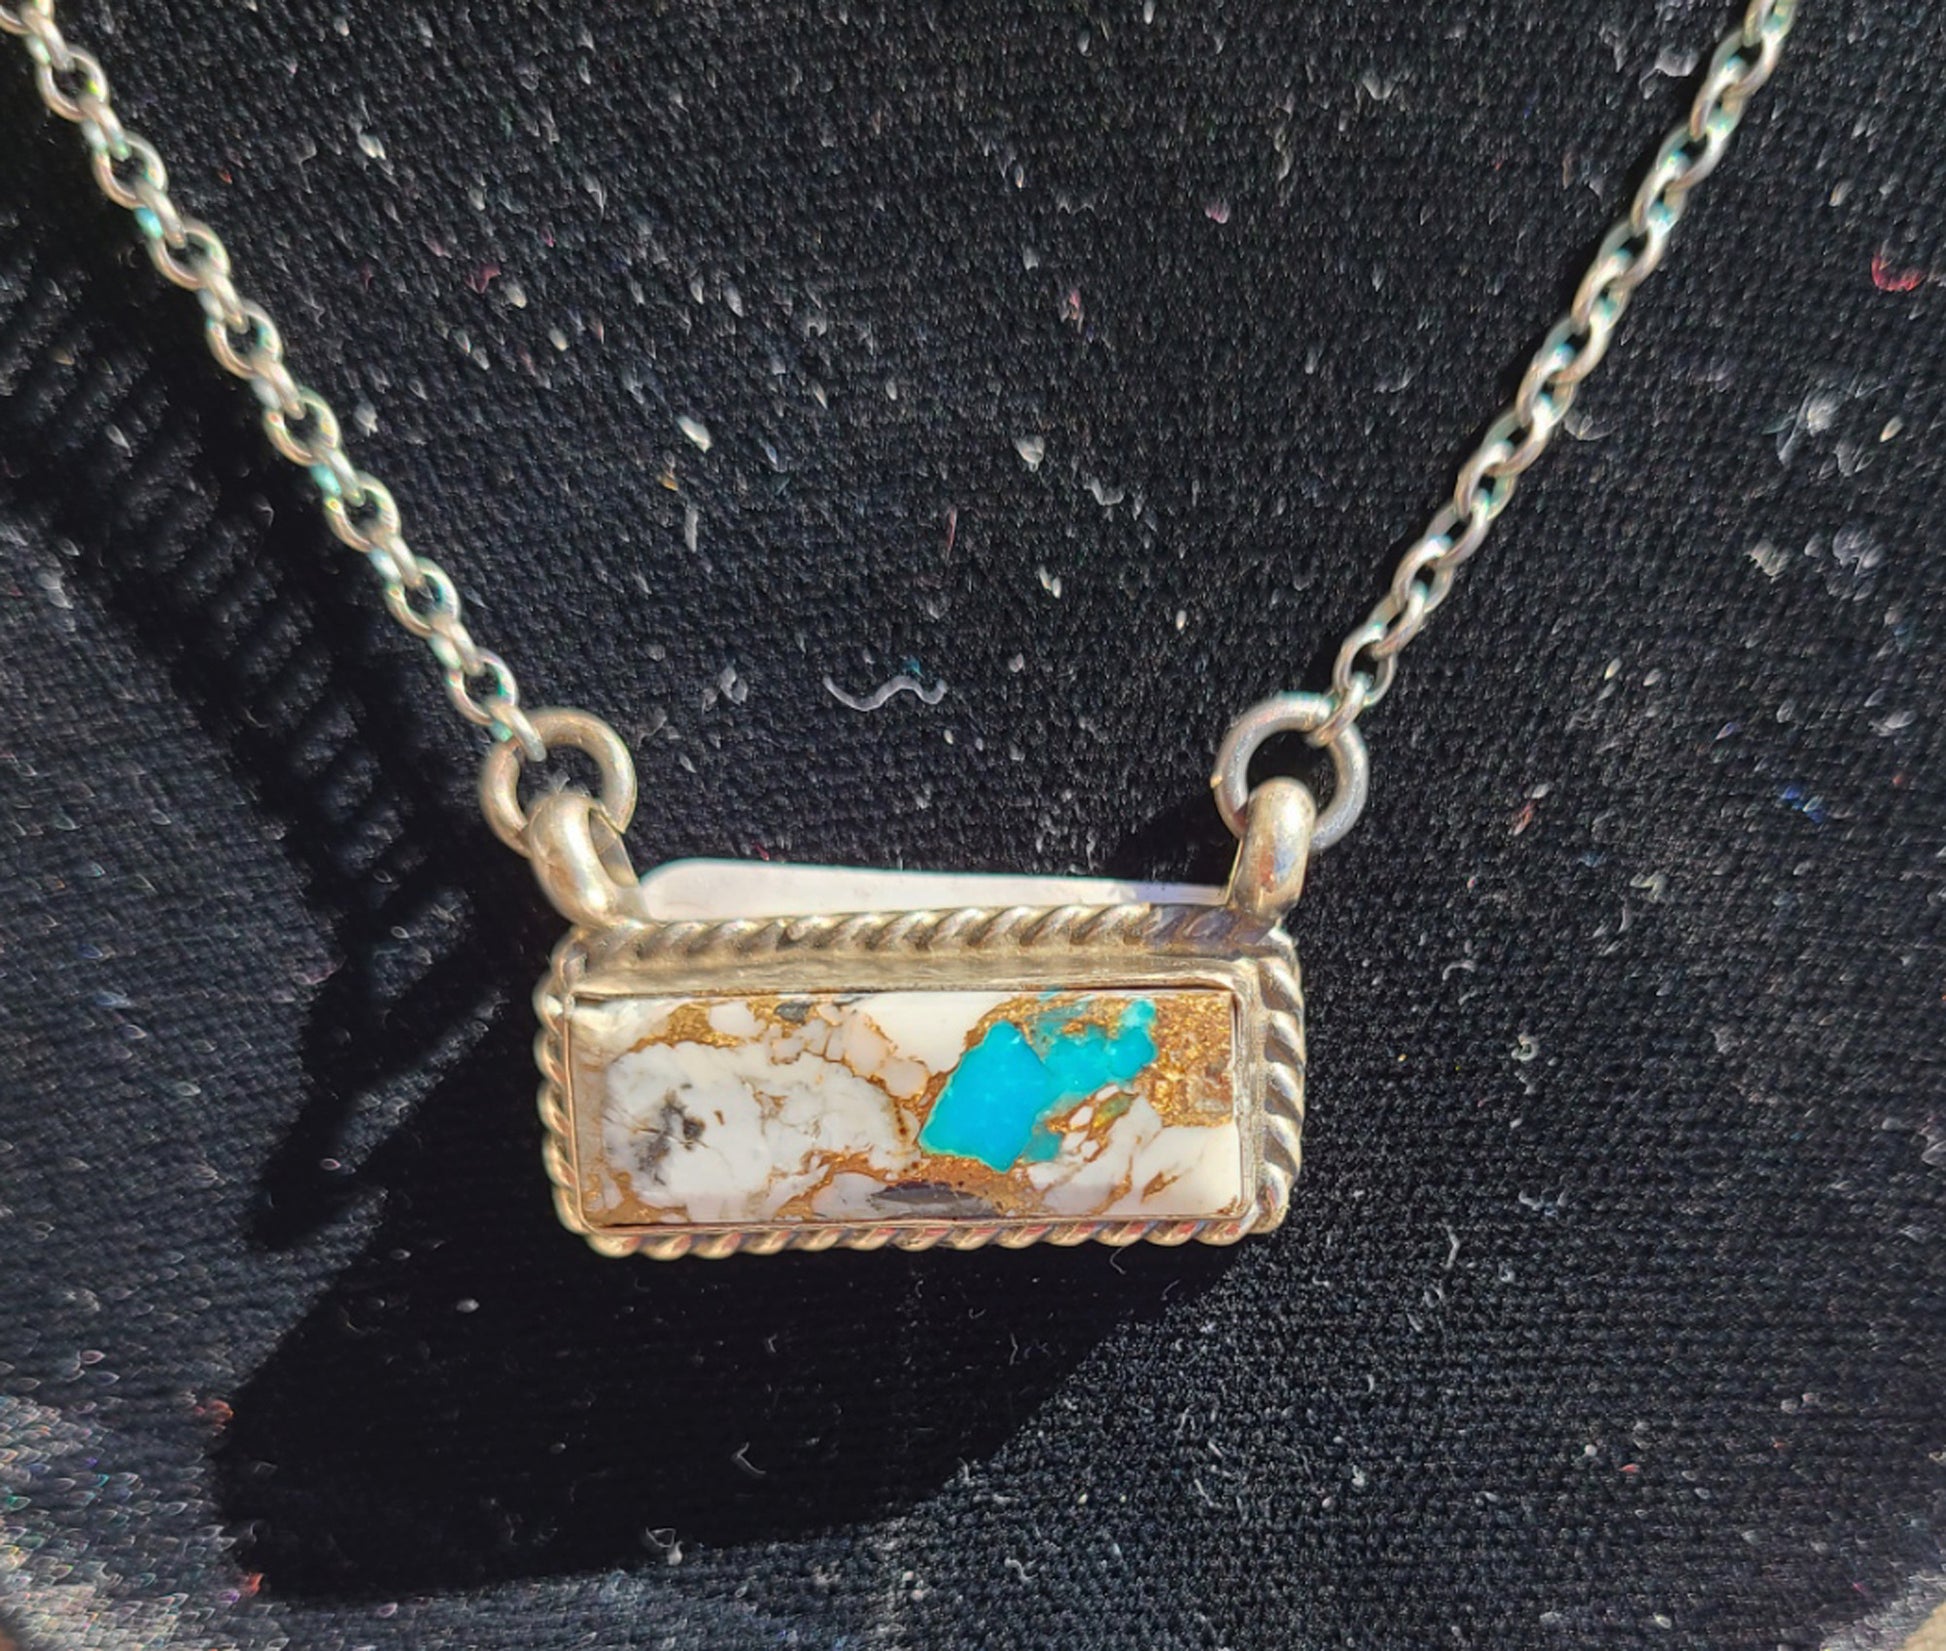 Beautiful colors in this White Buffalo and Turquoise necklace.  Lots of gold matrix especially near the blue turquoise. Set in Sterling Silver bezel with twisted rope design.  Chain is Sterling Silver.  Oxidized for a vintage look.  Navajo Artist, Augustine Largo  Approximate length: 16 inch  Bar is approximately 1 inch long  Certificate of Authenticity as shown.